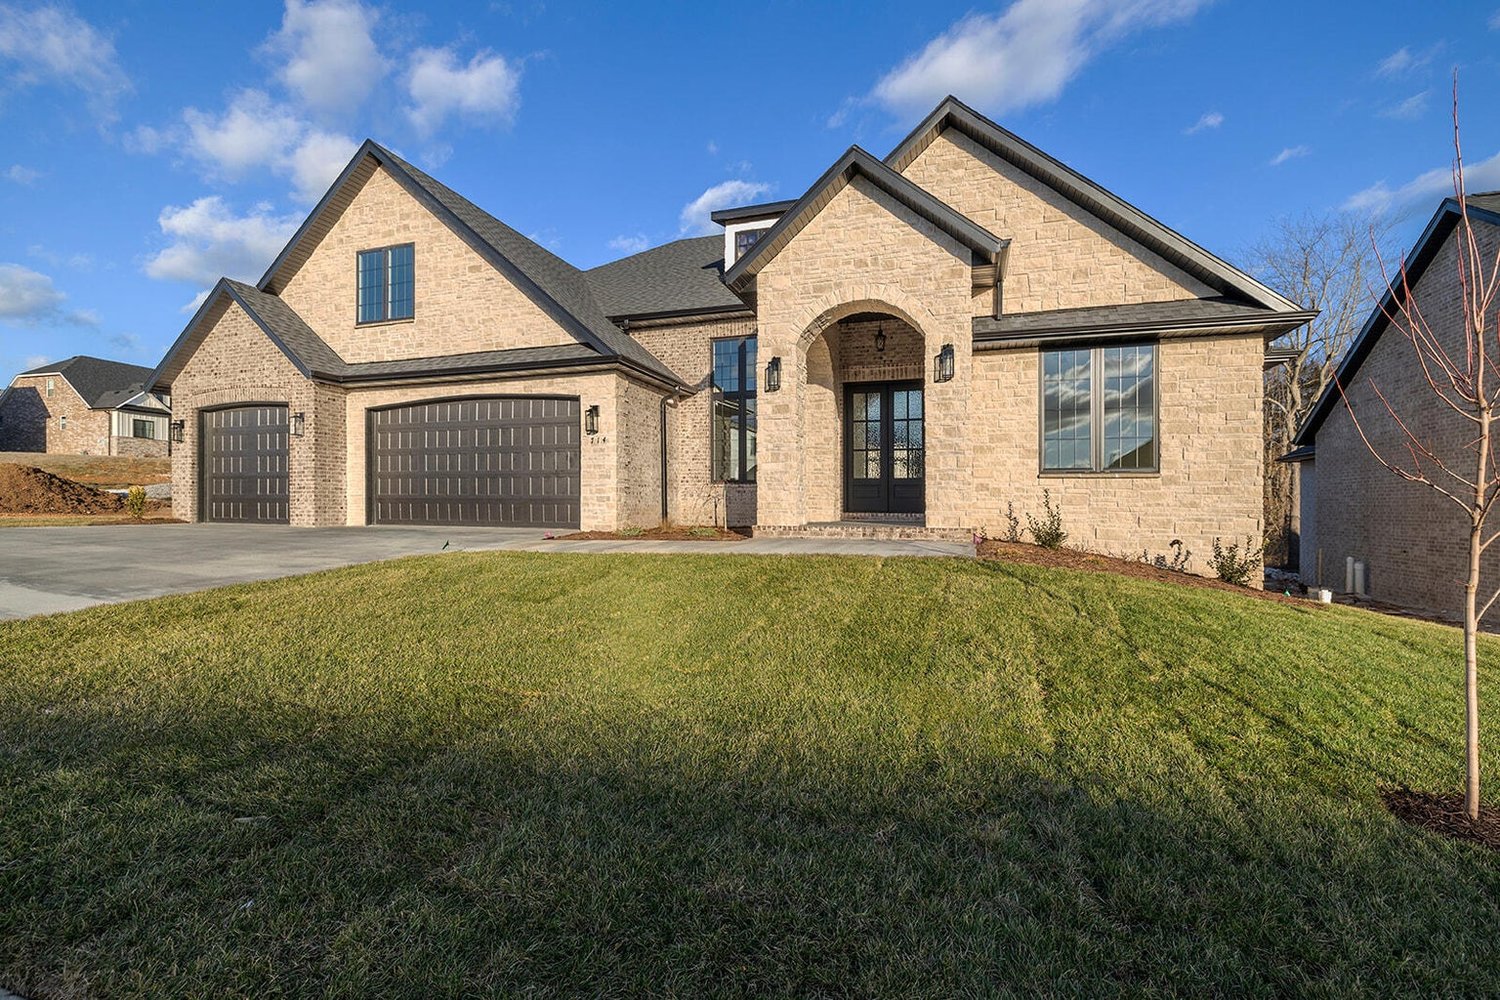 714 S. Hickory Drive 
$698,900 
Bedrooms: 5 
Bathrooms: 4 
Listing firm: ReeceNichols Real Estate